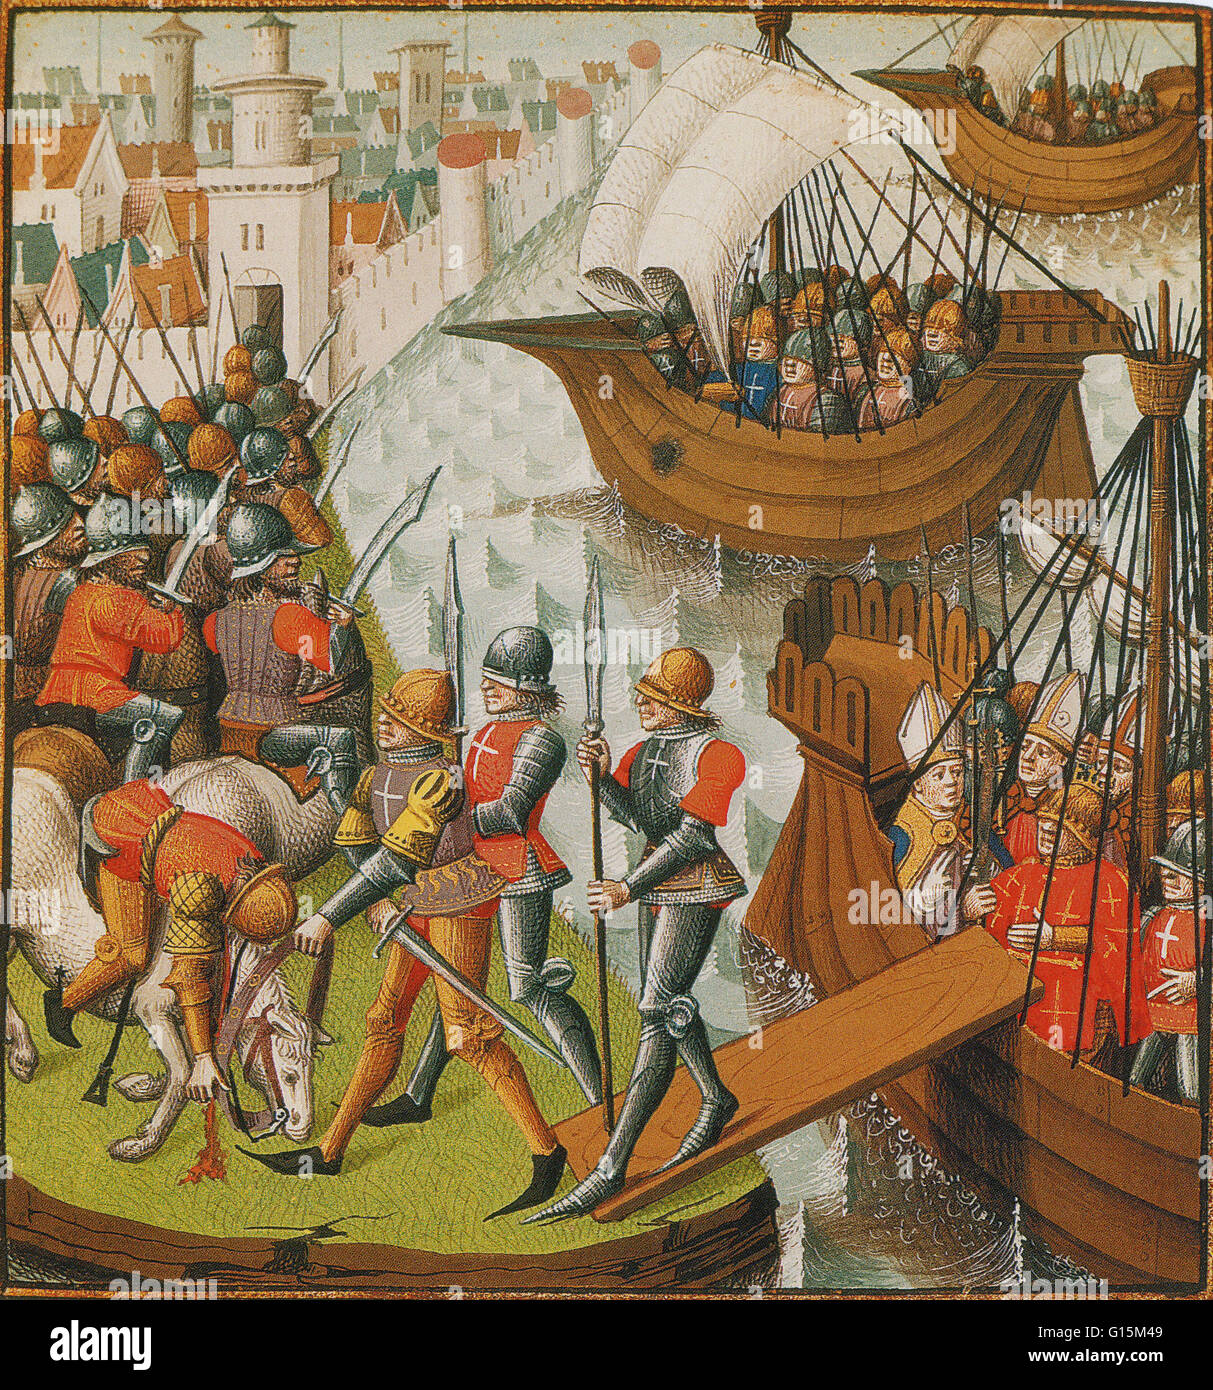 15th century illuminated manuscript shows the papal legate, Pelagius, waiting to disembark at Damietta, as troops prepare to besiege the city. The Siege of Damietta of 1218 was part of the Fifth Crusade (1213-1221) an attempt to reacquire Jerusalem and th Stock Photo